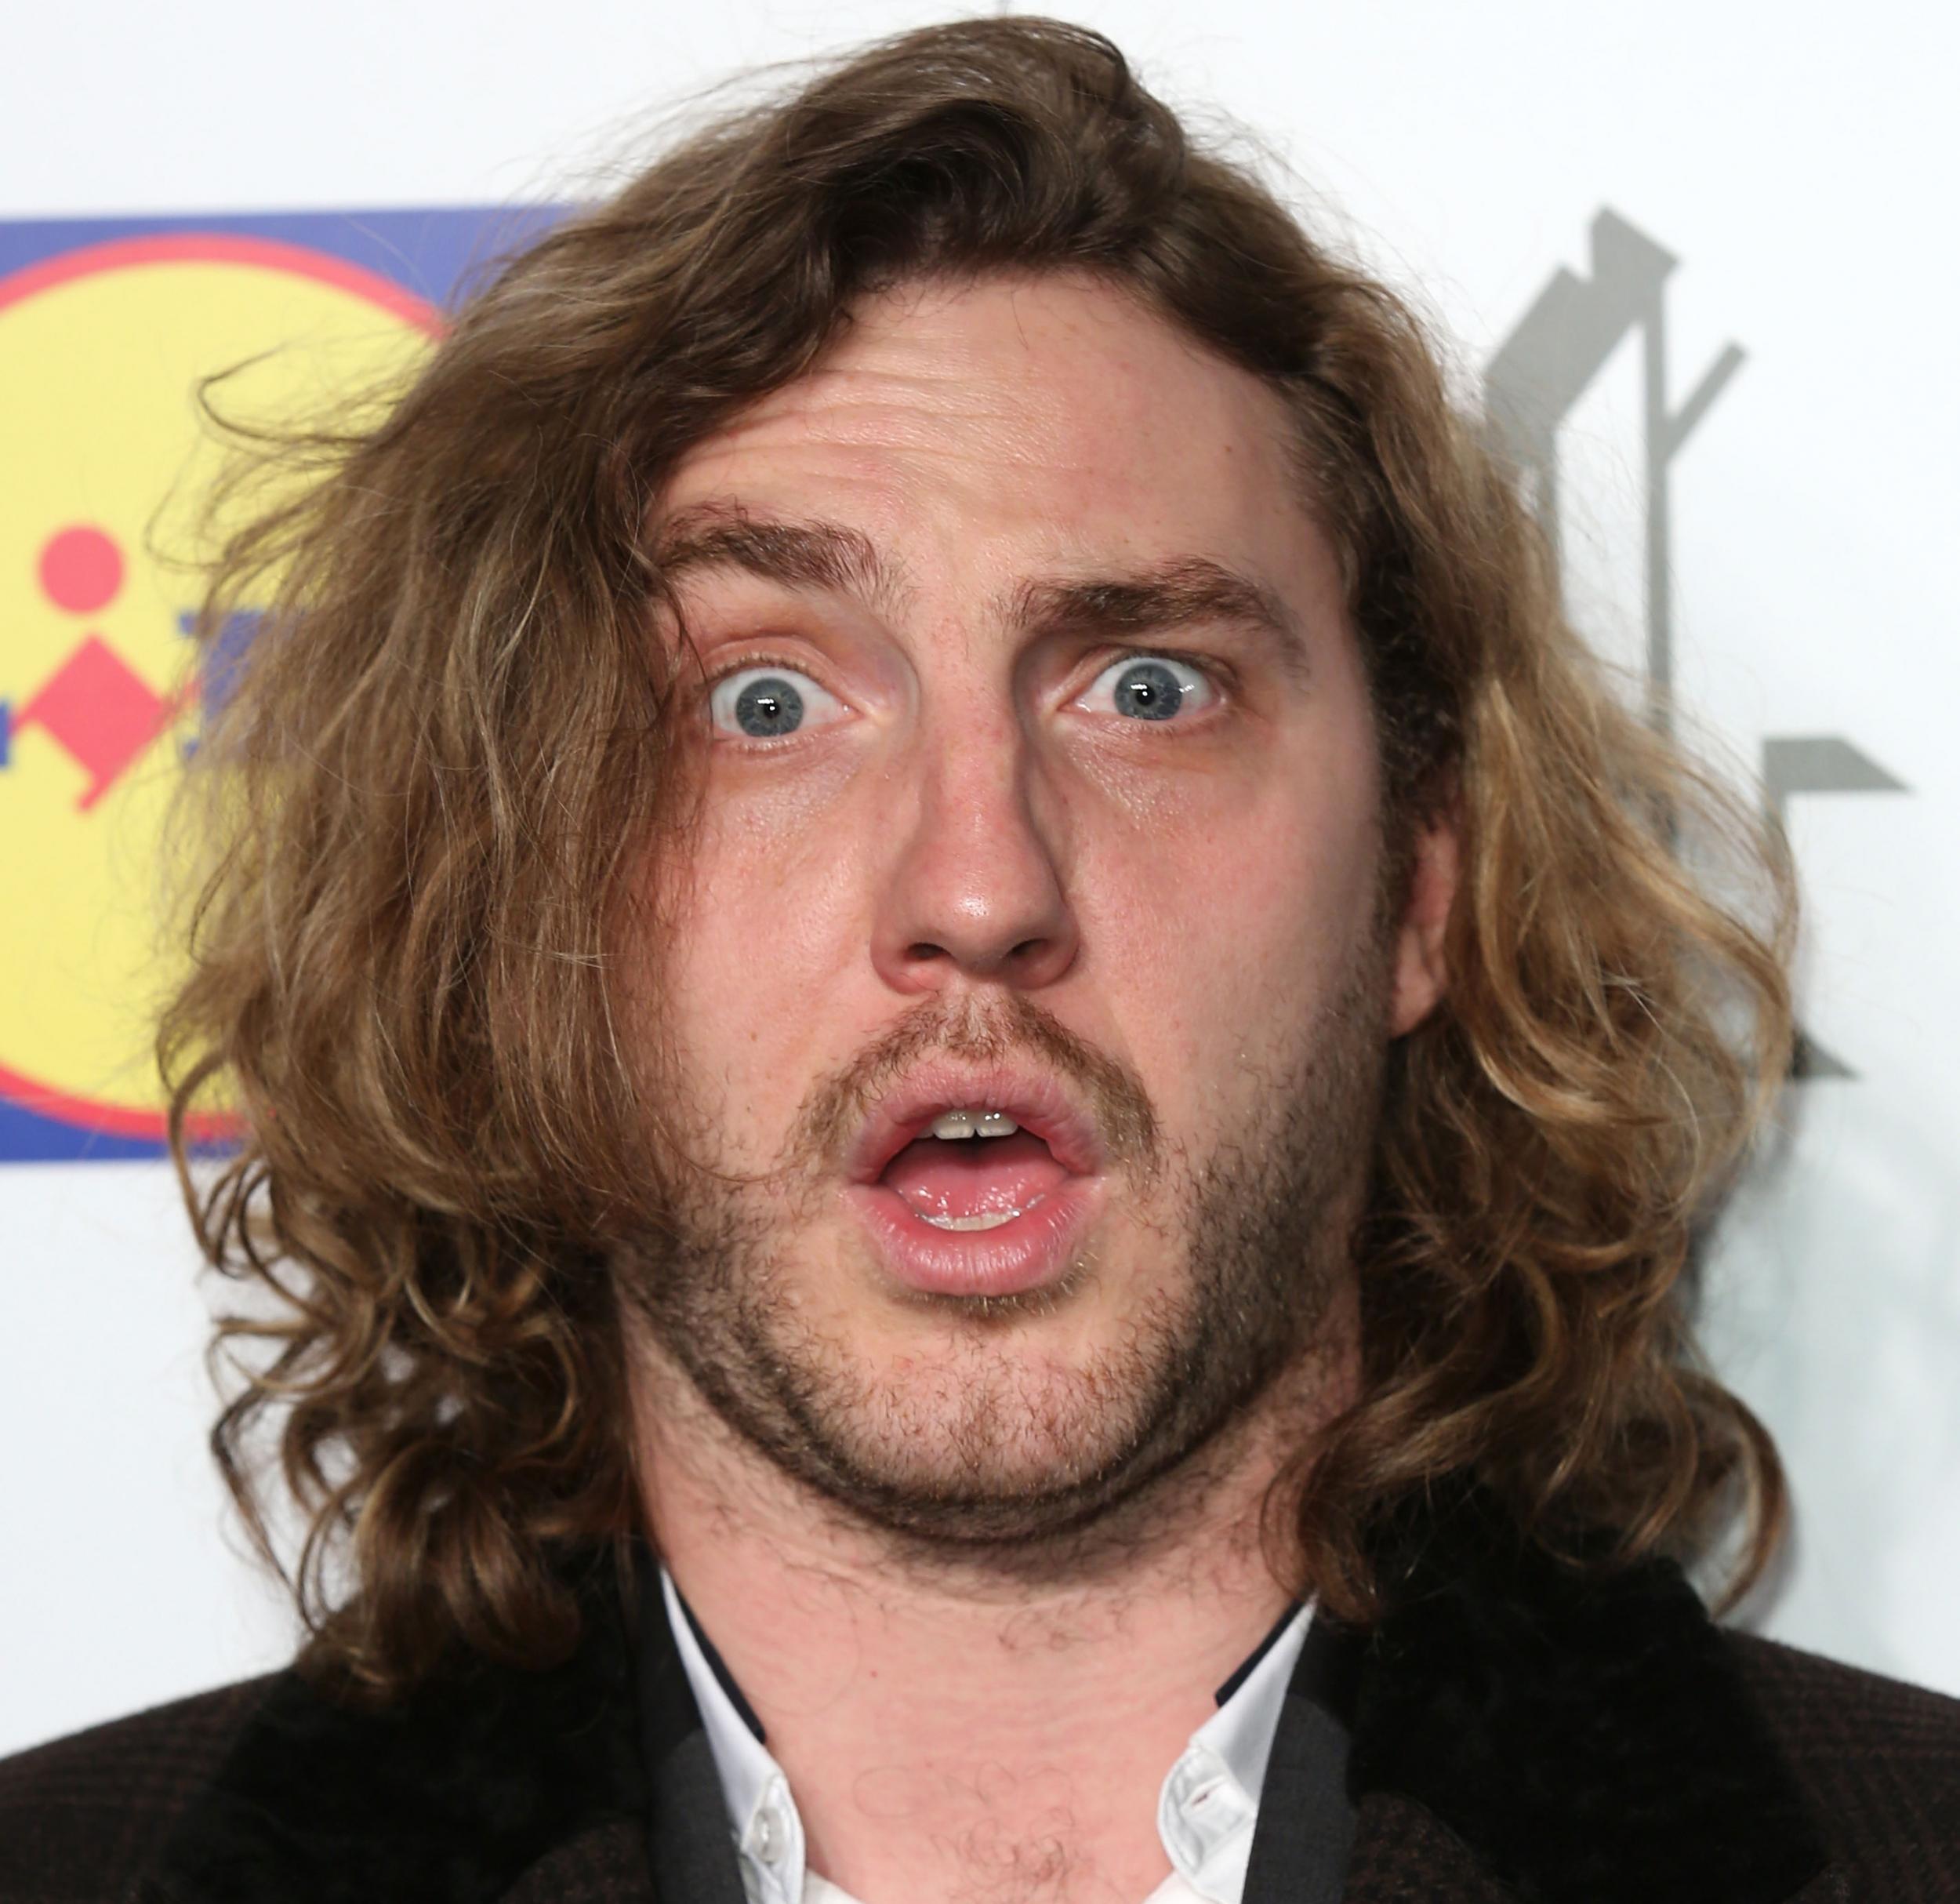 Comedian Seann Walsh has also been linked to our blonde bombshell